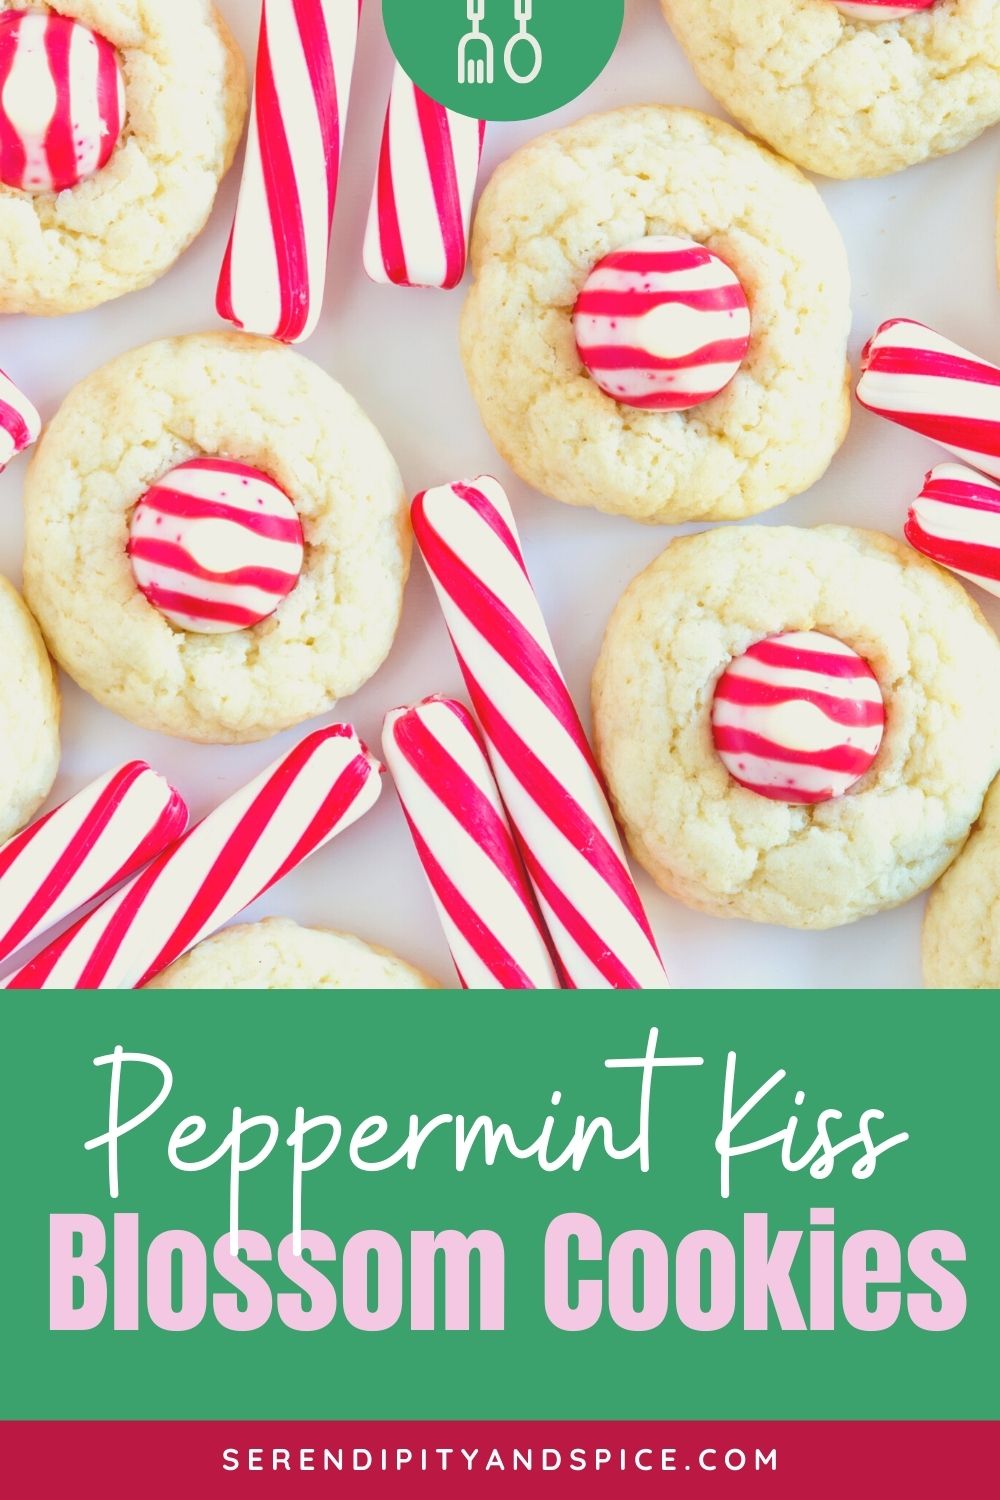 Peppermint Kiss Blossom Cookies without Peanut Butter